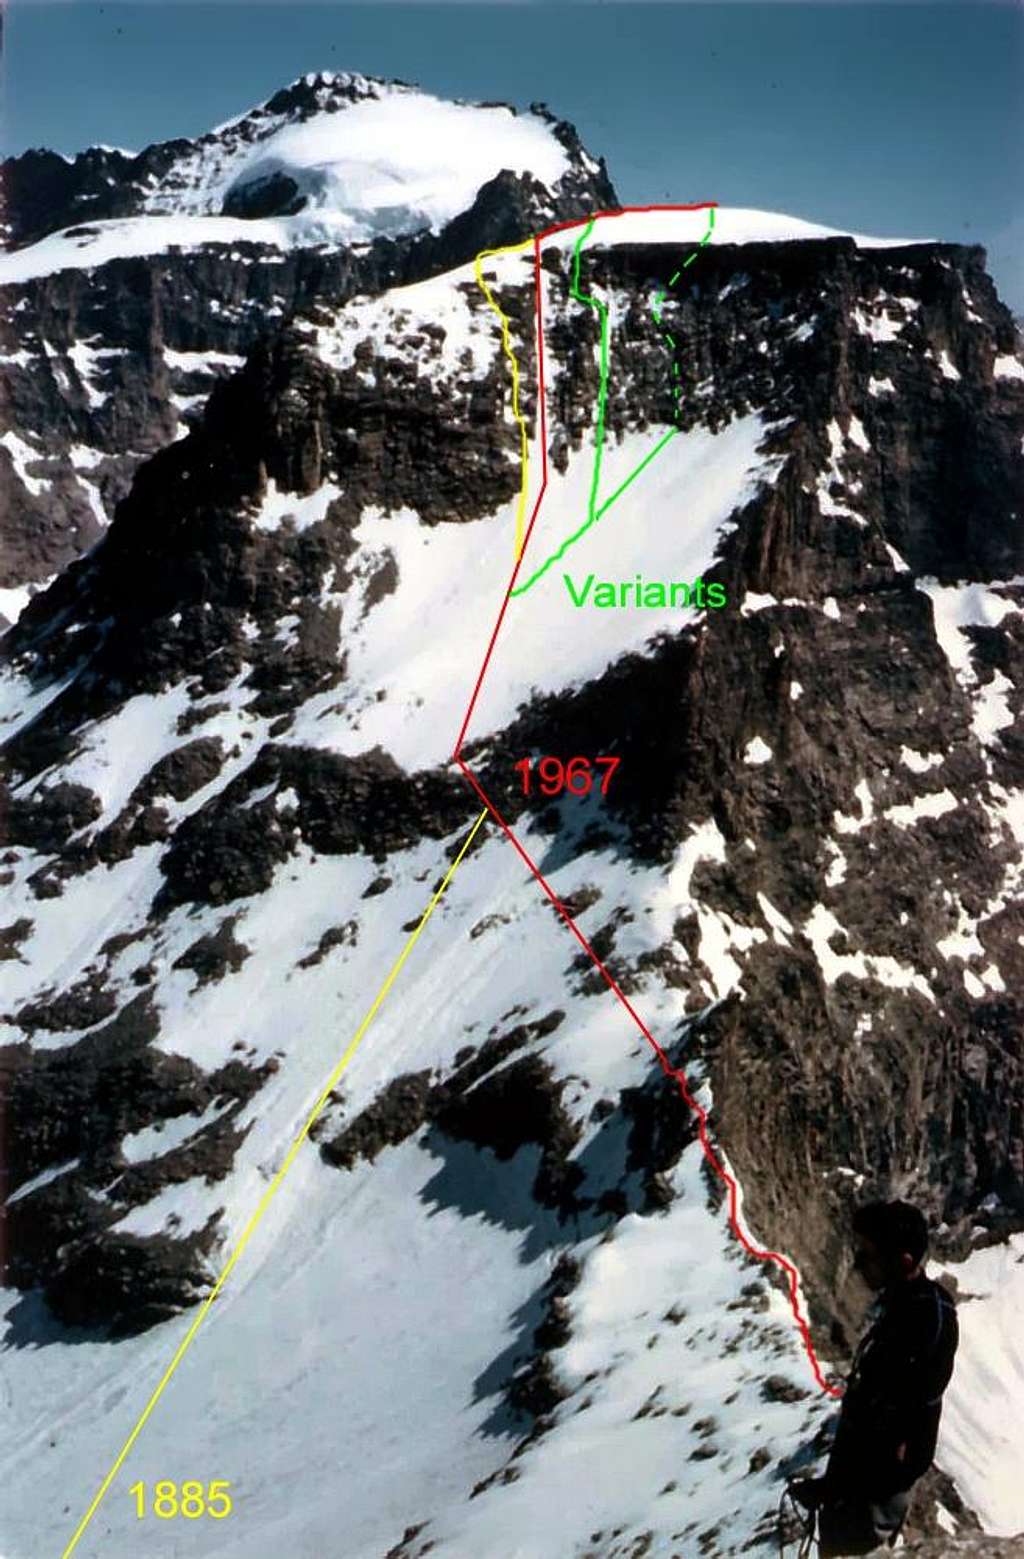 Ciarforon North Face and Normal Routes 3642m 